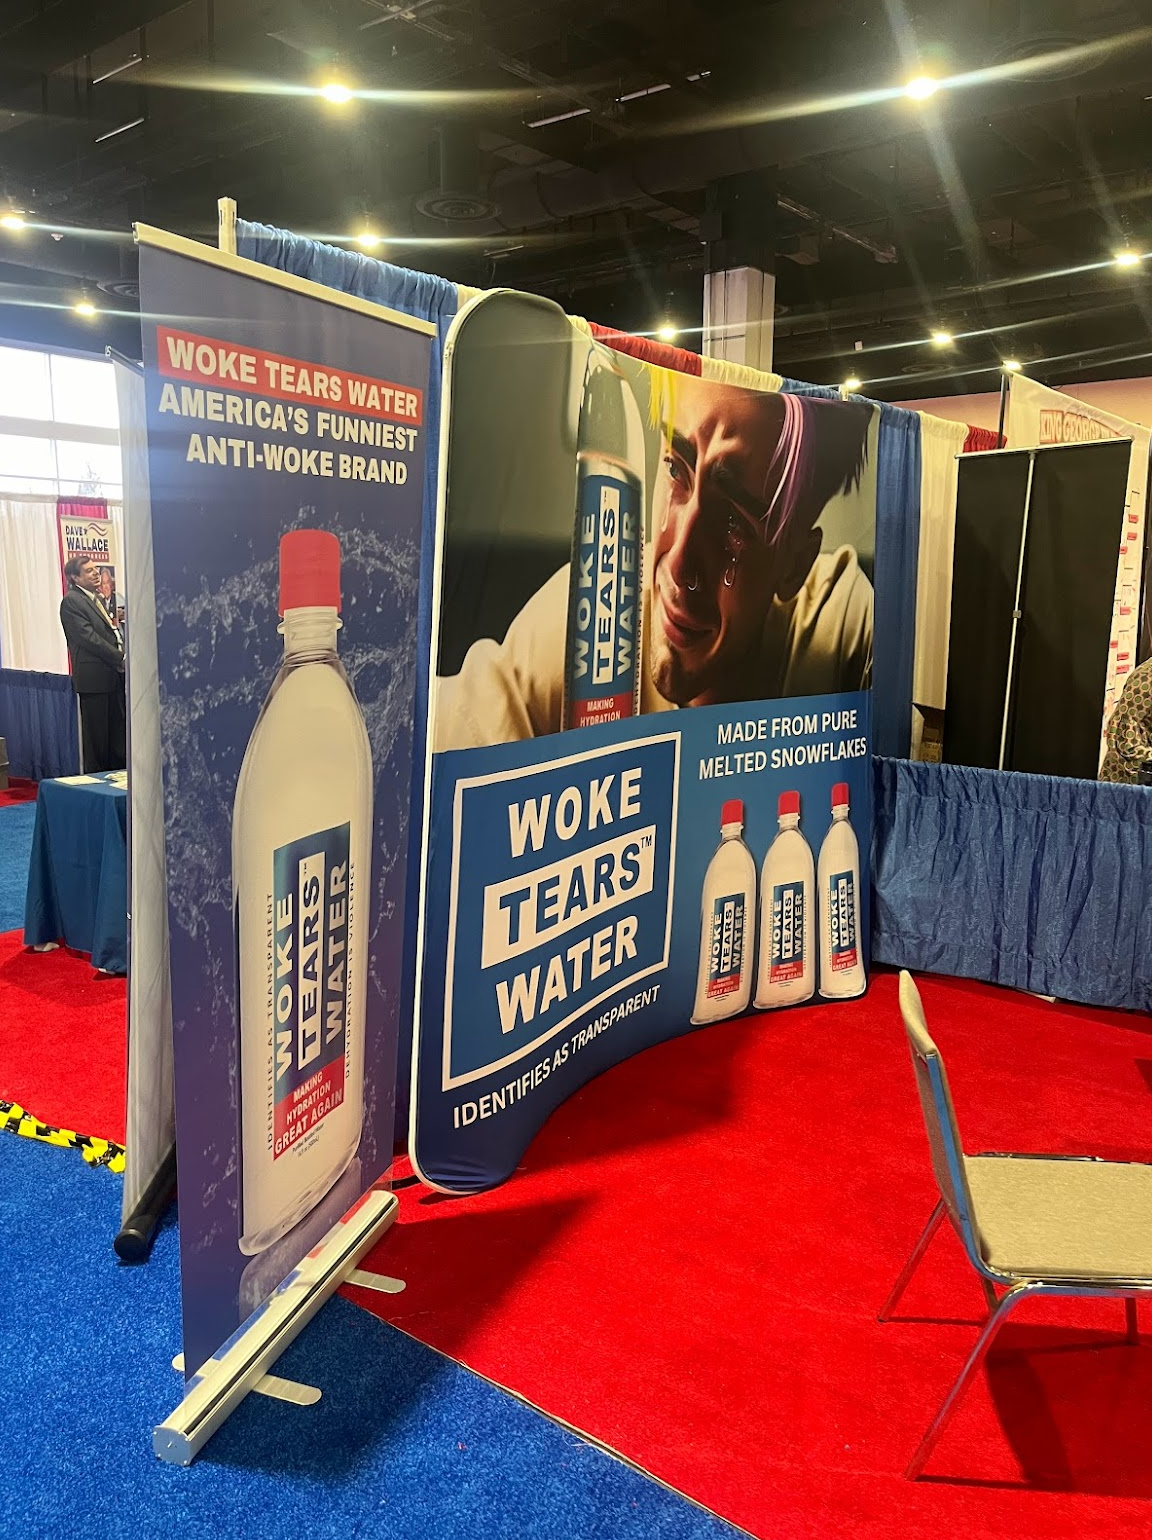 ‘Woke tears’ in a bottle was sold at CPAC